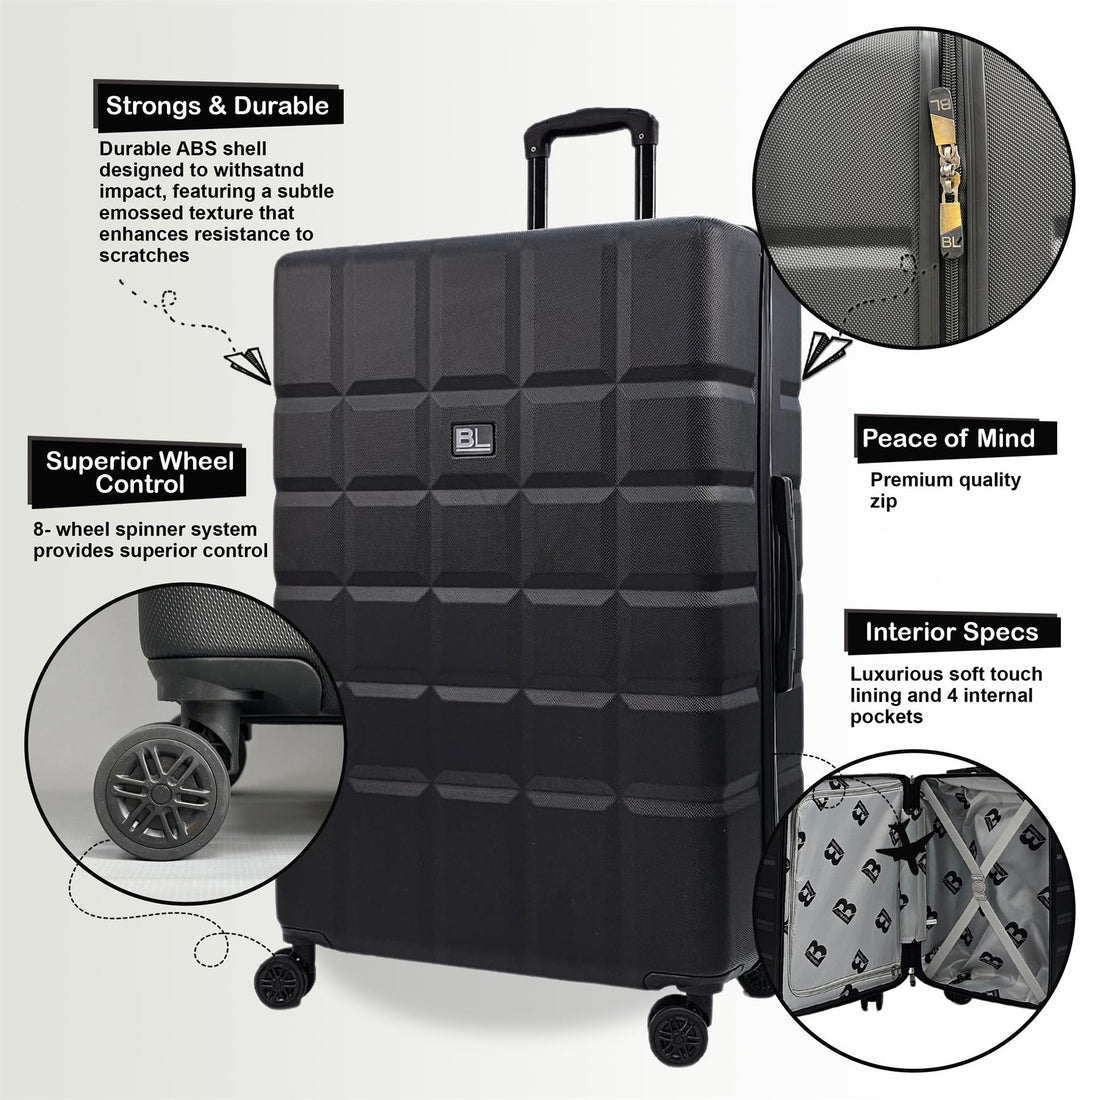 Coker Large Soft Shell Suitcase in Black